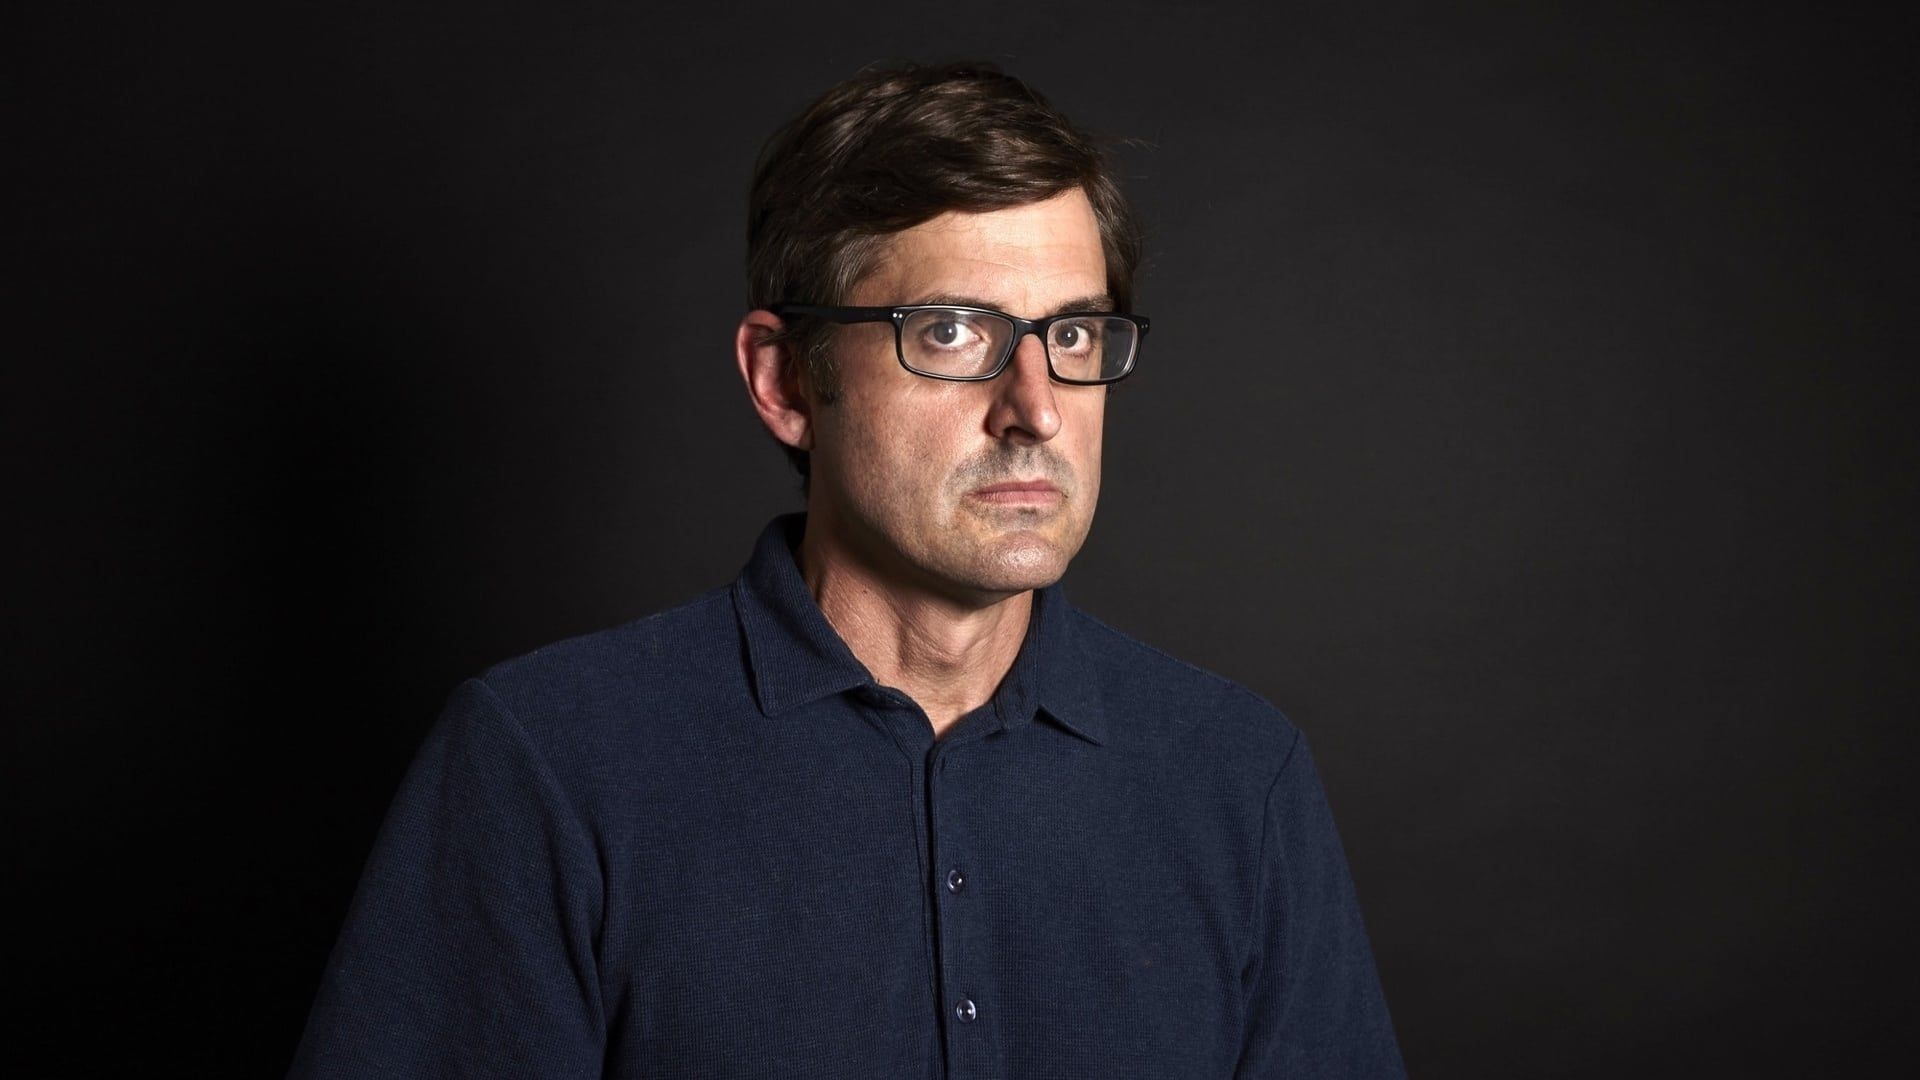 Louis Theroux: Behind Bars background